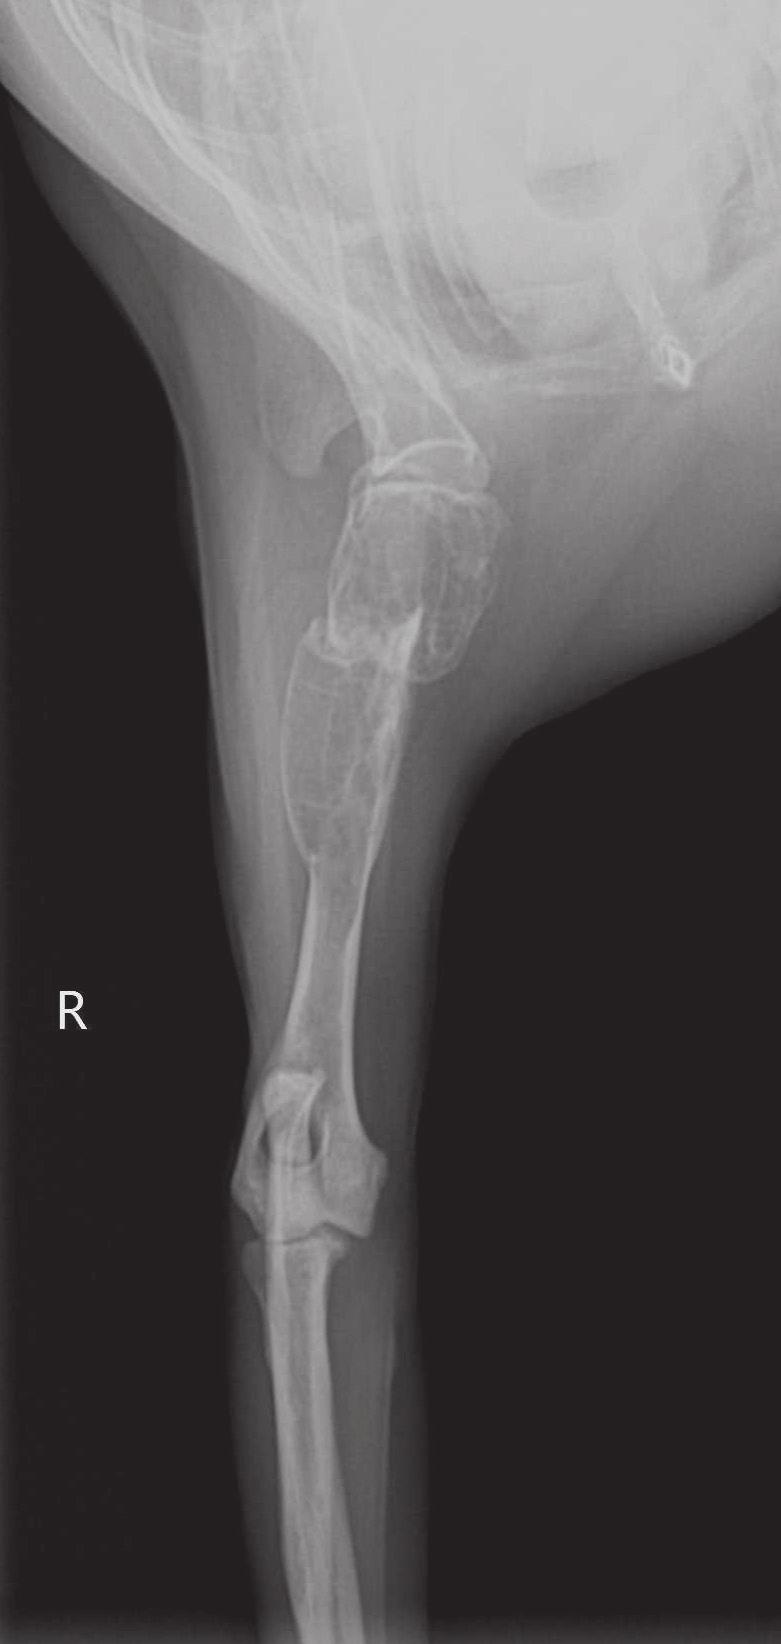 Focal osteoproliferative change on the proximal humeral metaphysis was also observed. (B) Craniocaudal view.